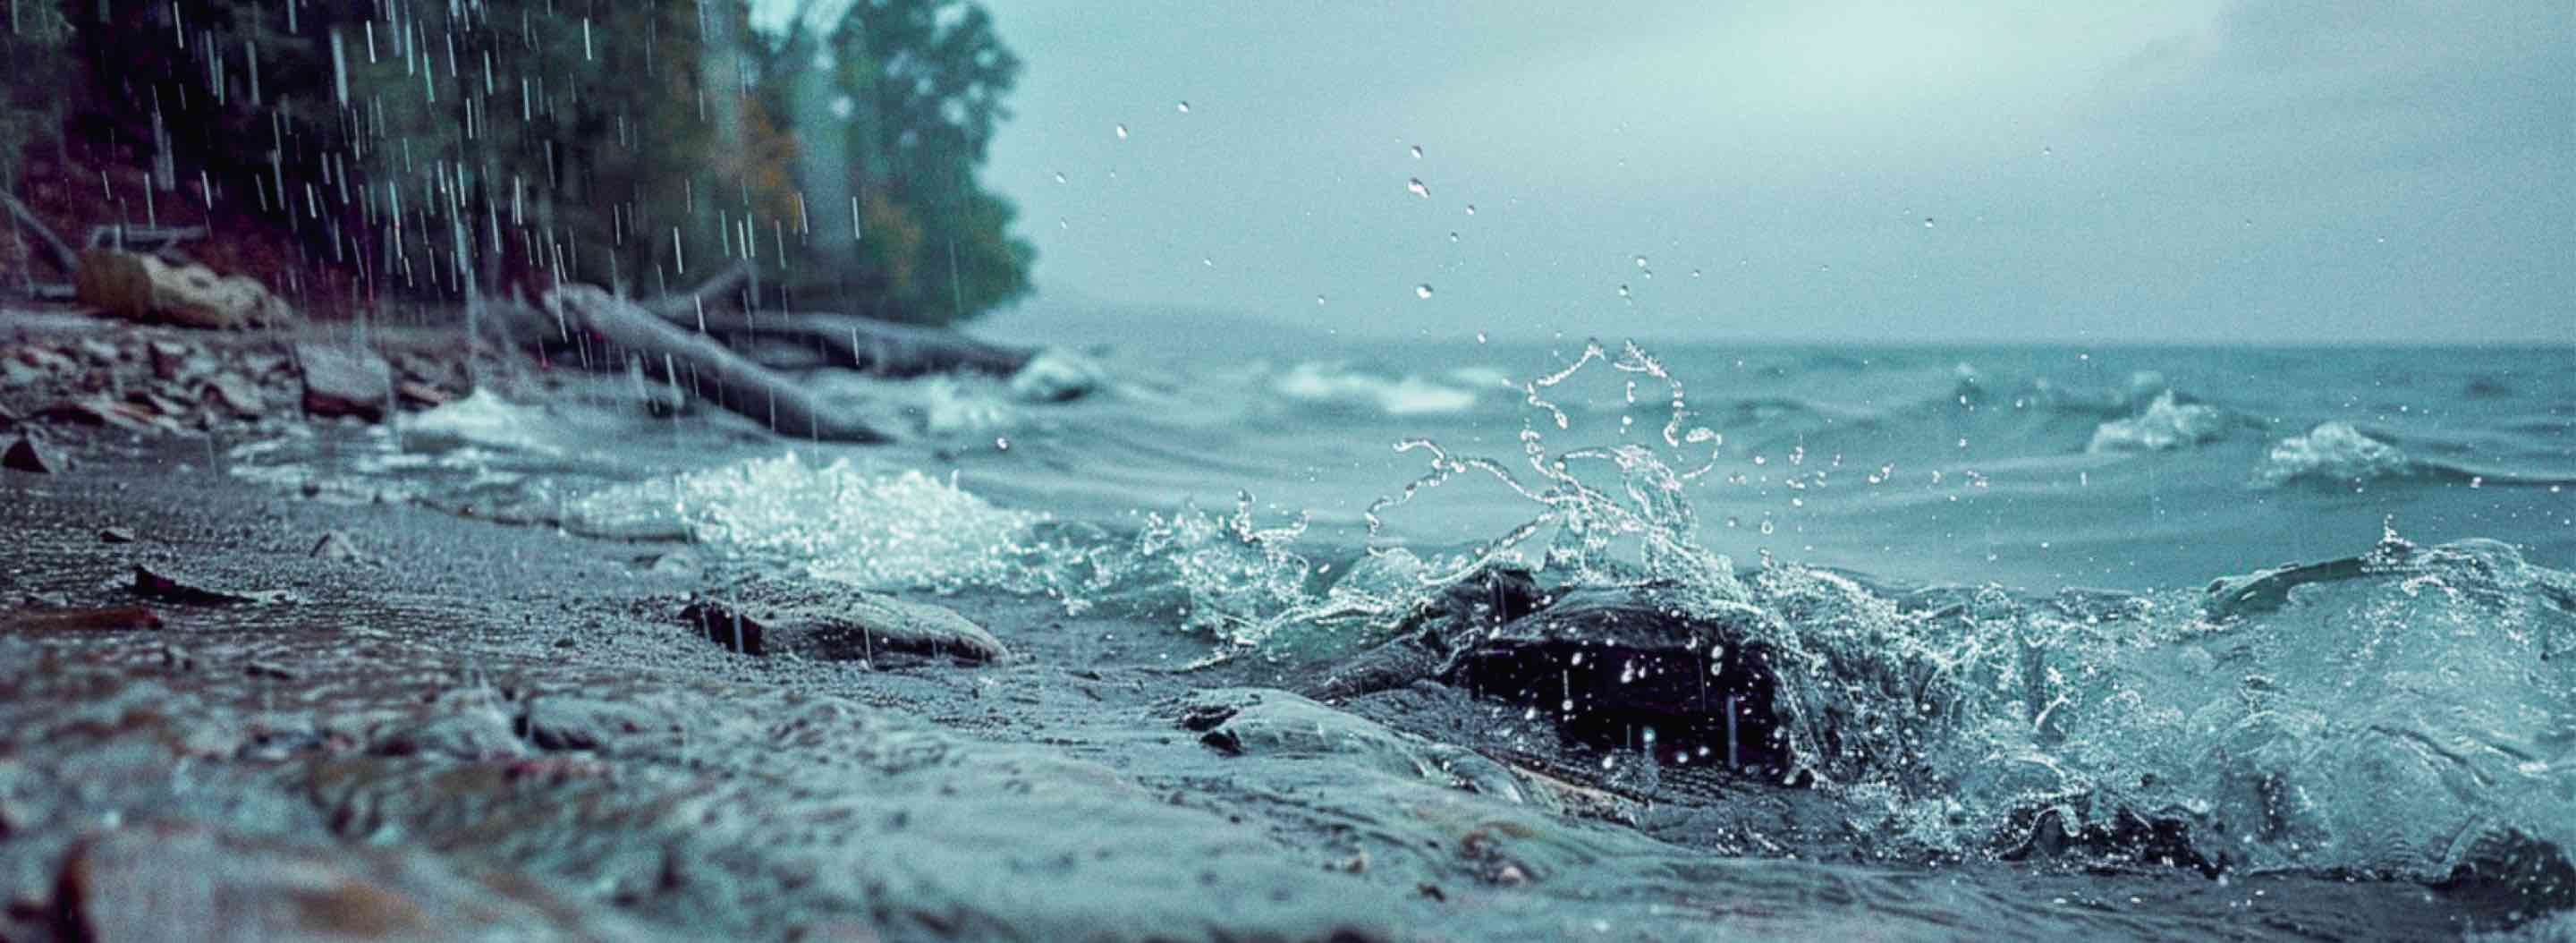 Dynamic close-up of raindrops hitting the rocky shoreline with splashing waves, capturing the raw power of nature during a rainstorm by a lake, with the blurred backdrop of a dense forest.